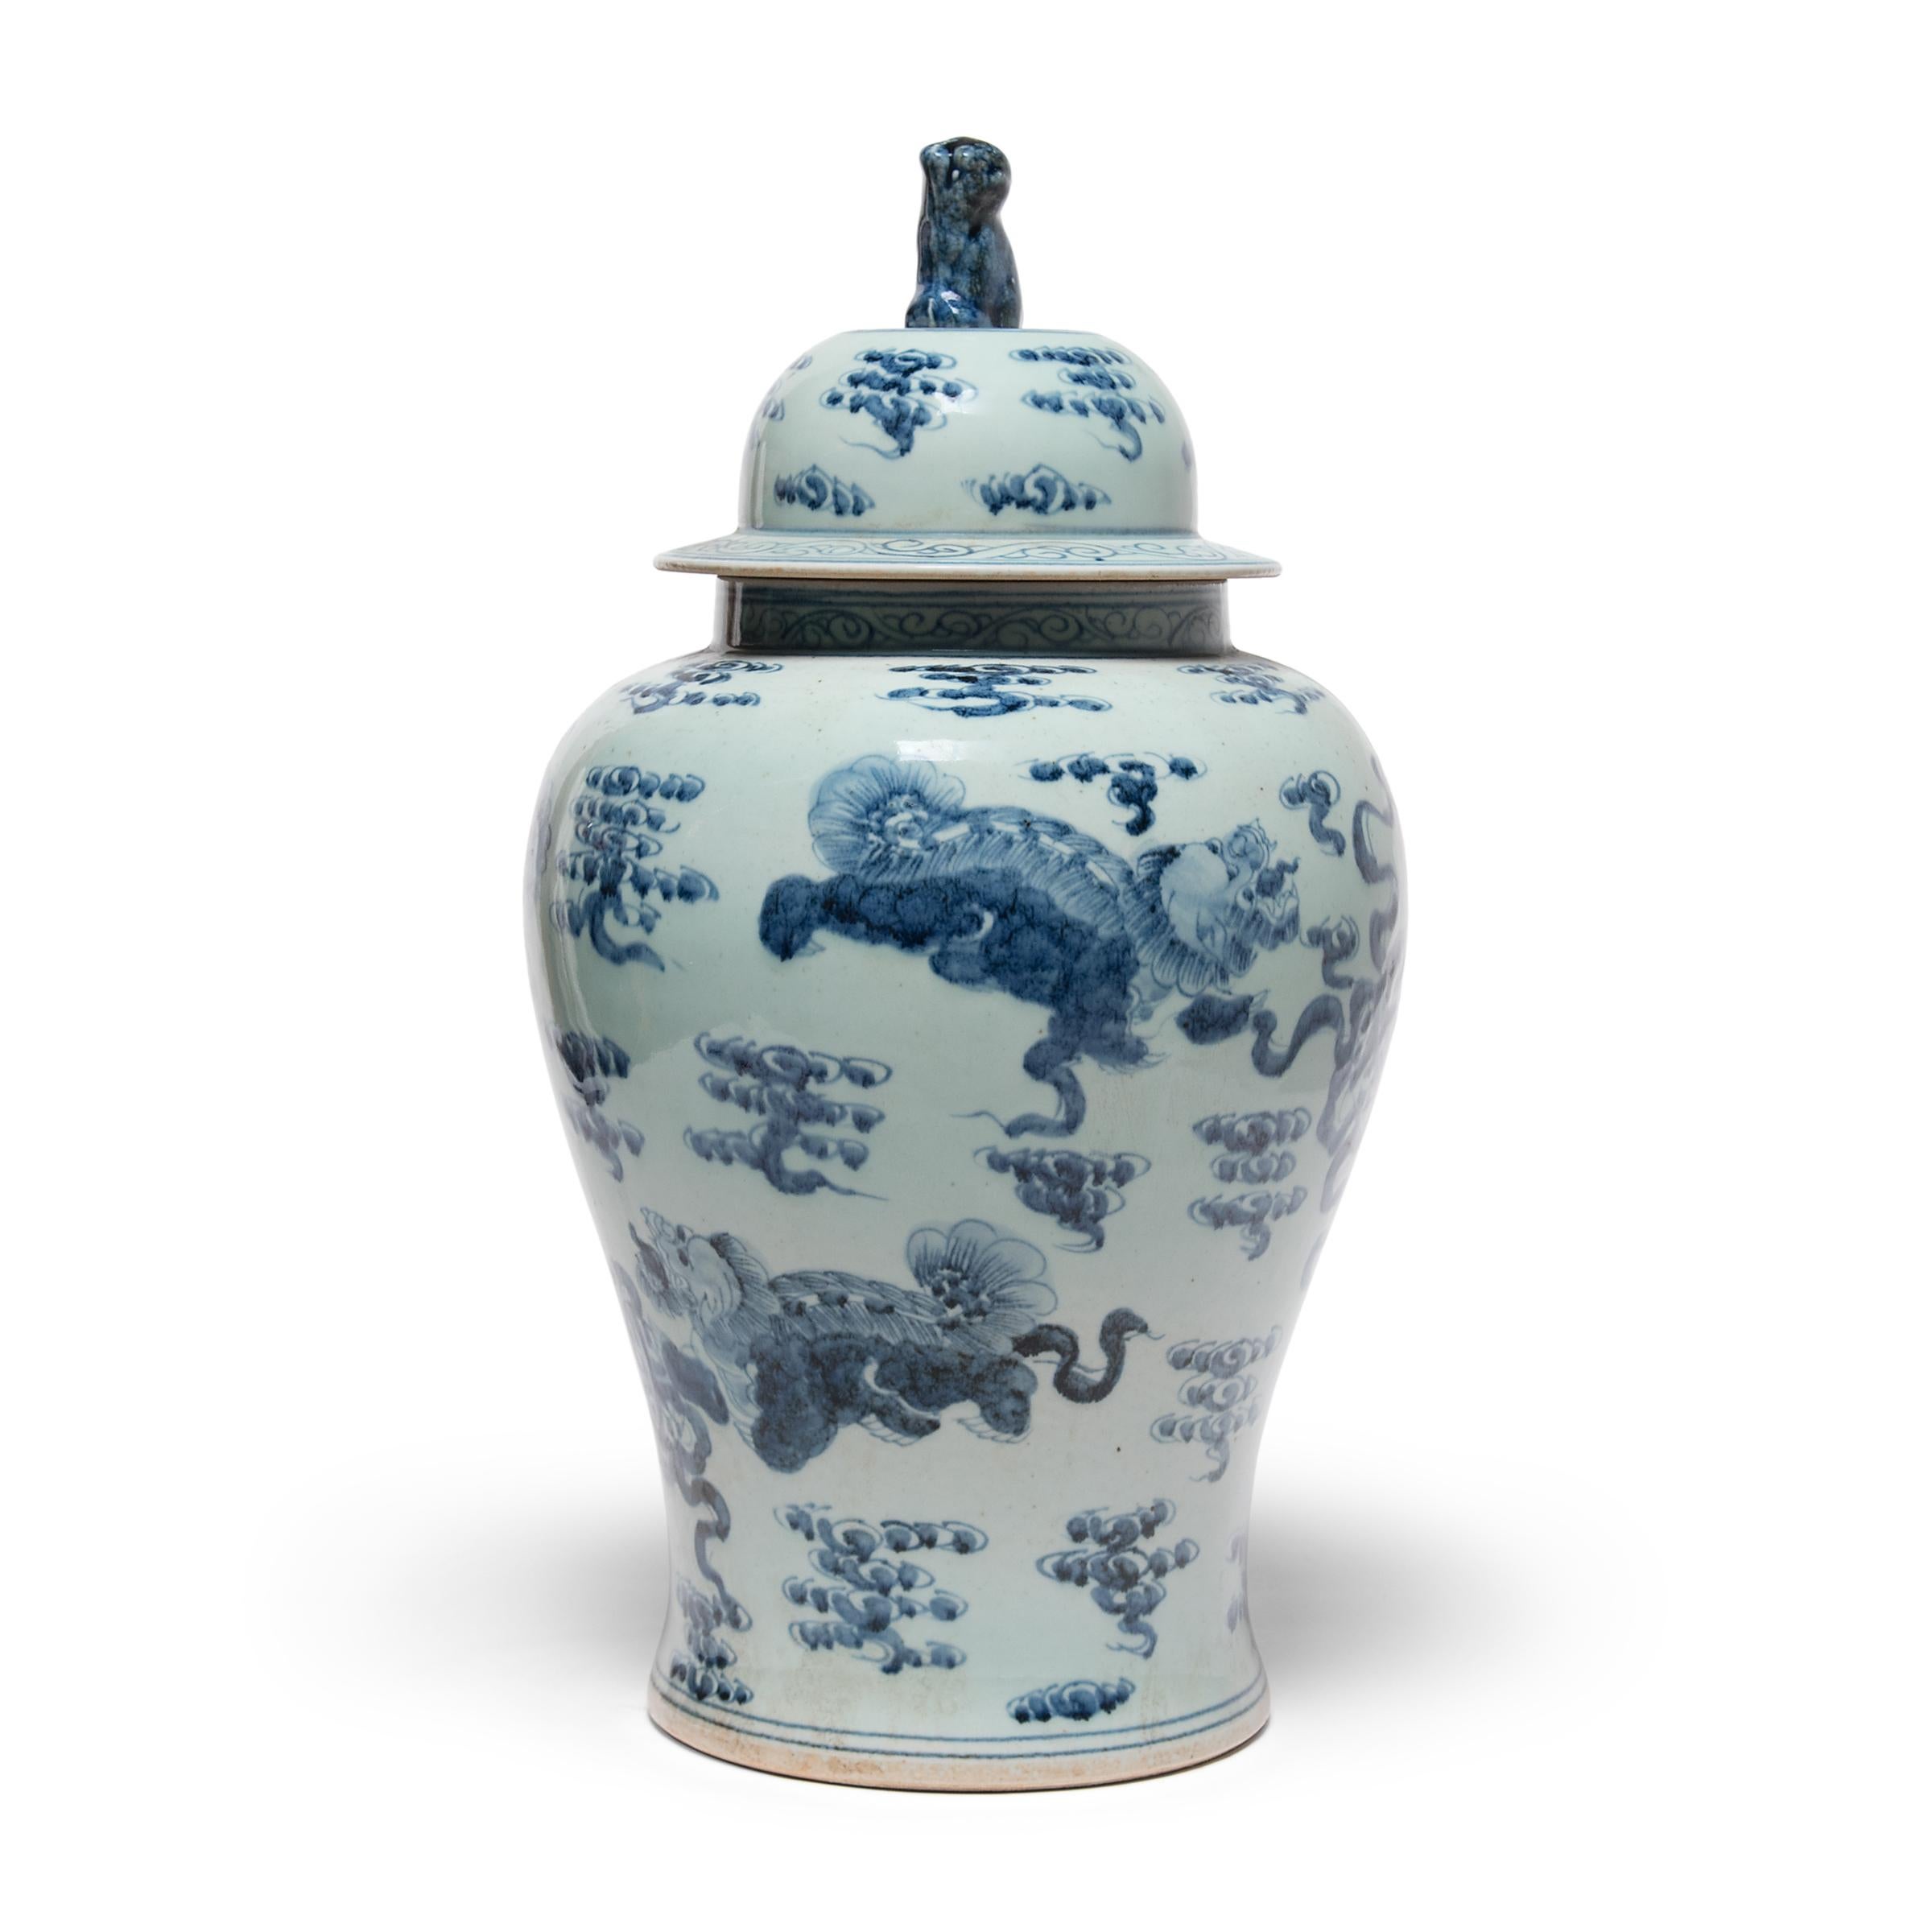 Images of shizi, a lion-dog symbol of power and strength of character, cavort among the stylized clouds of heaven on this hand painted covered jar. Created by a contemporary artisan, this baluster jar is a beautiful continuation of the tradition of